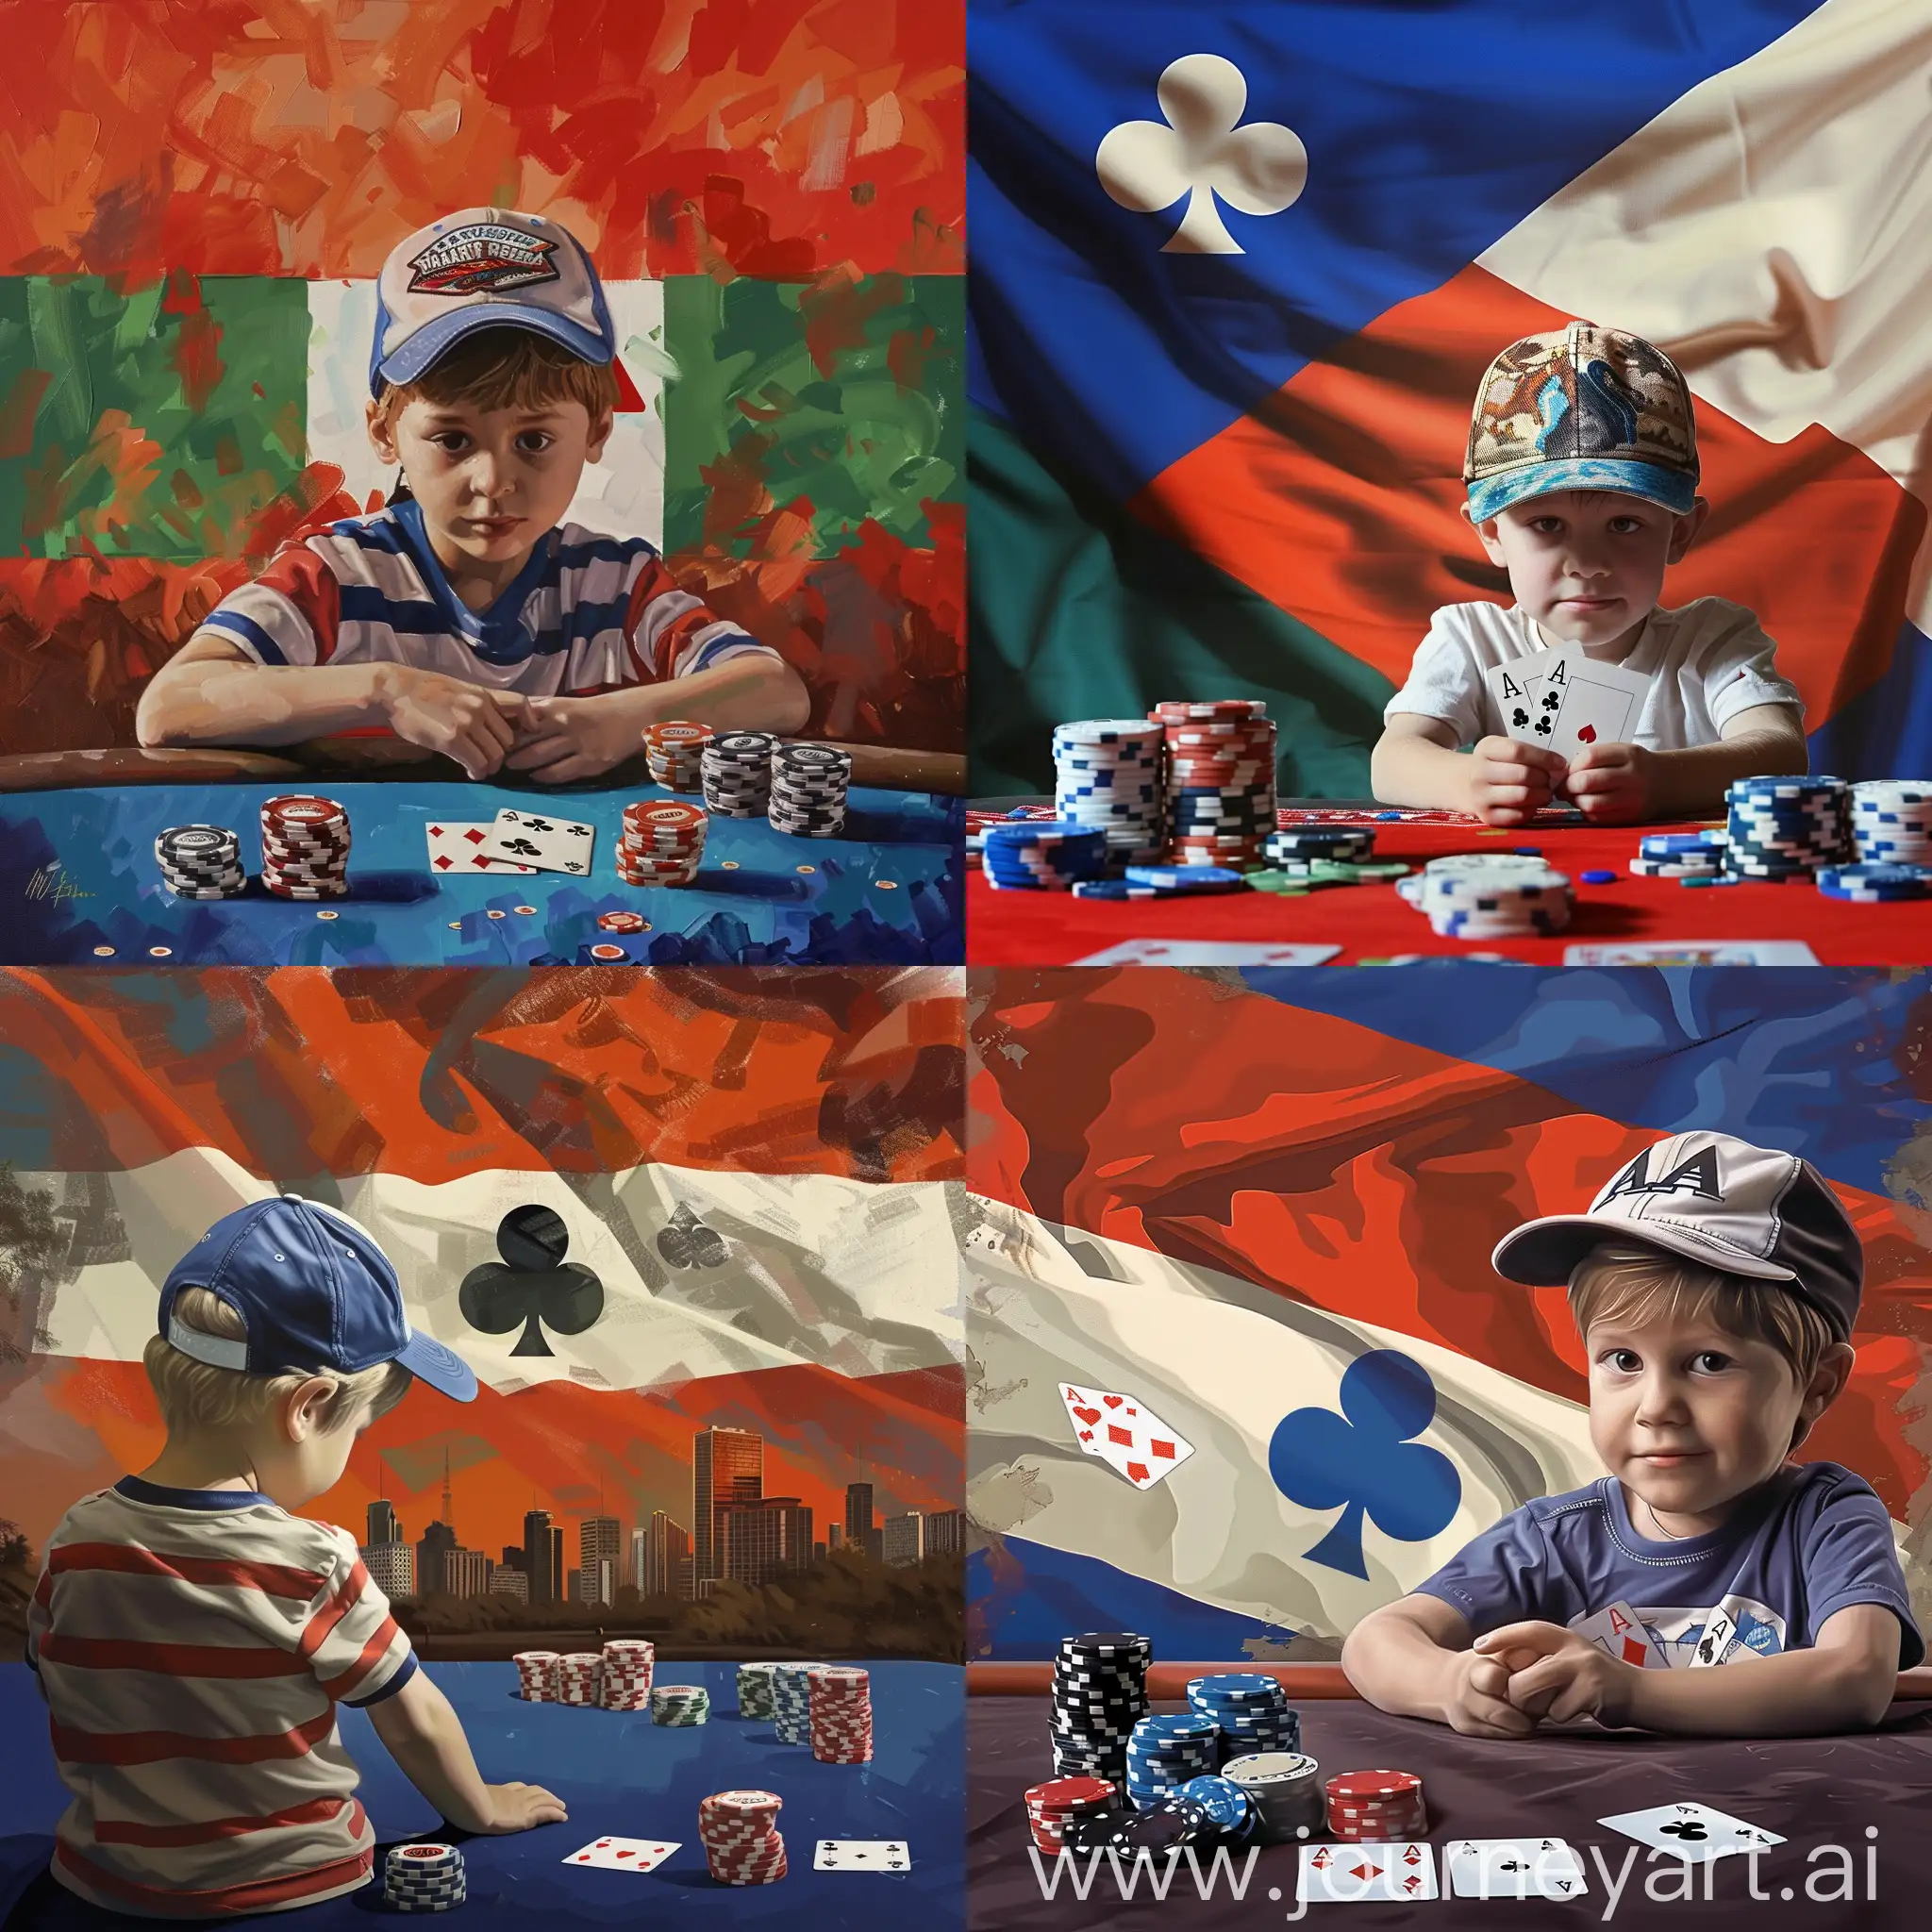 Young-Poker-Pro-in-Asuncion-with-Paraguay-Flag-Background